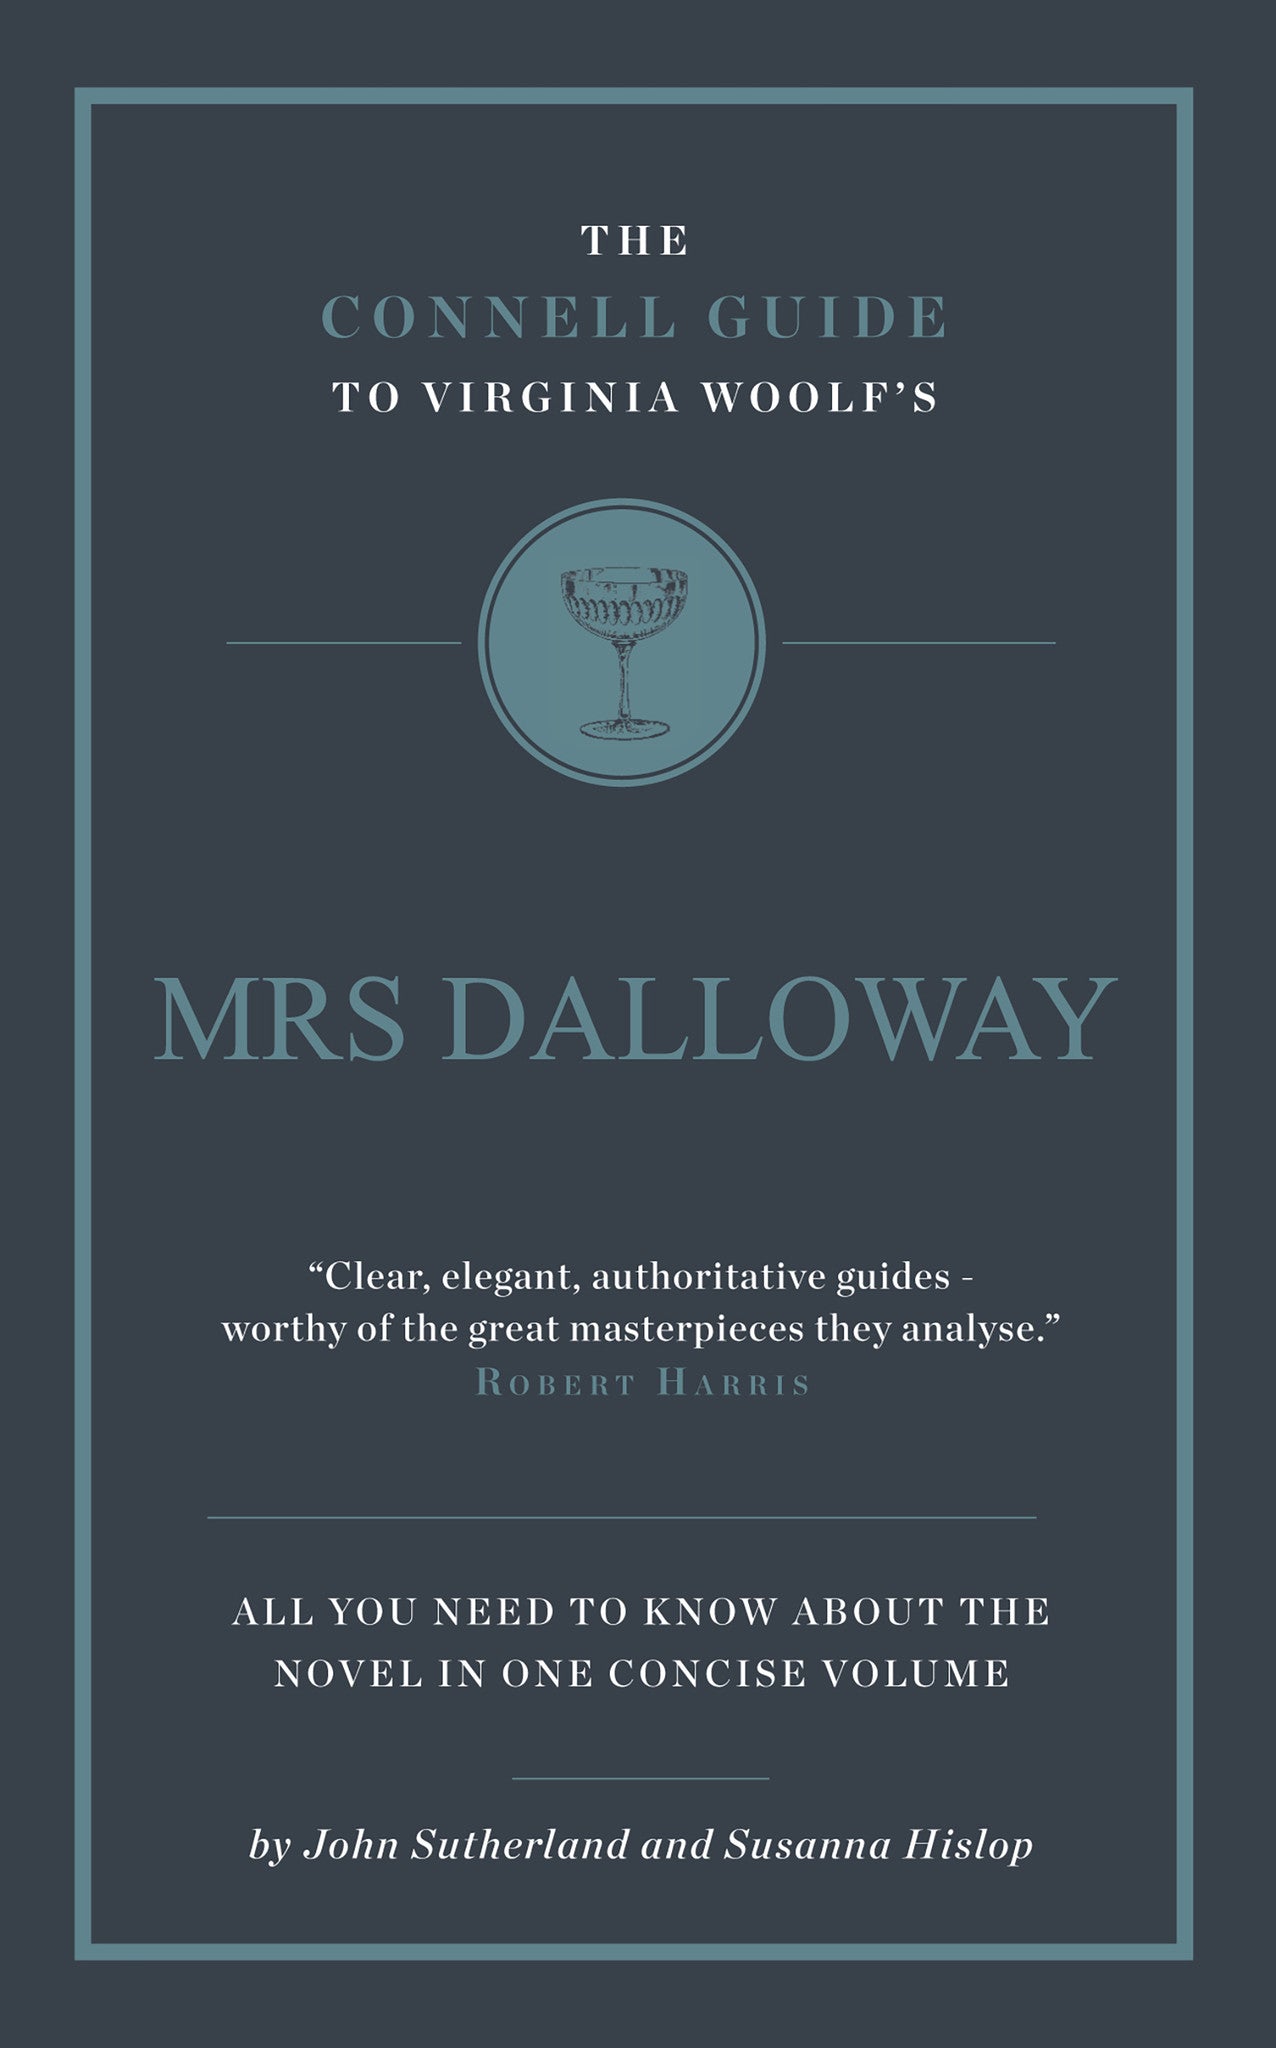 mrs dalloway by virginia woolf